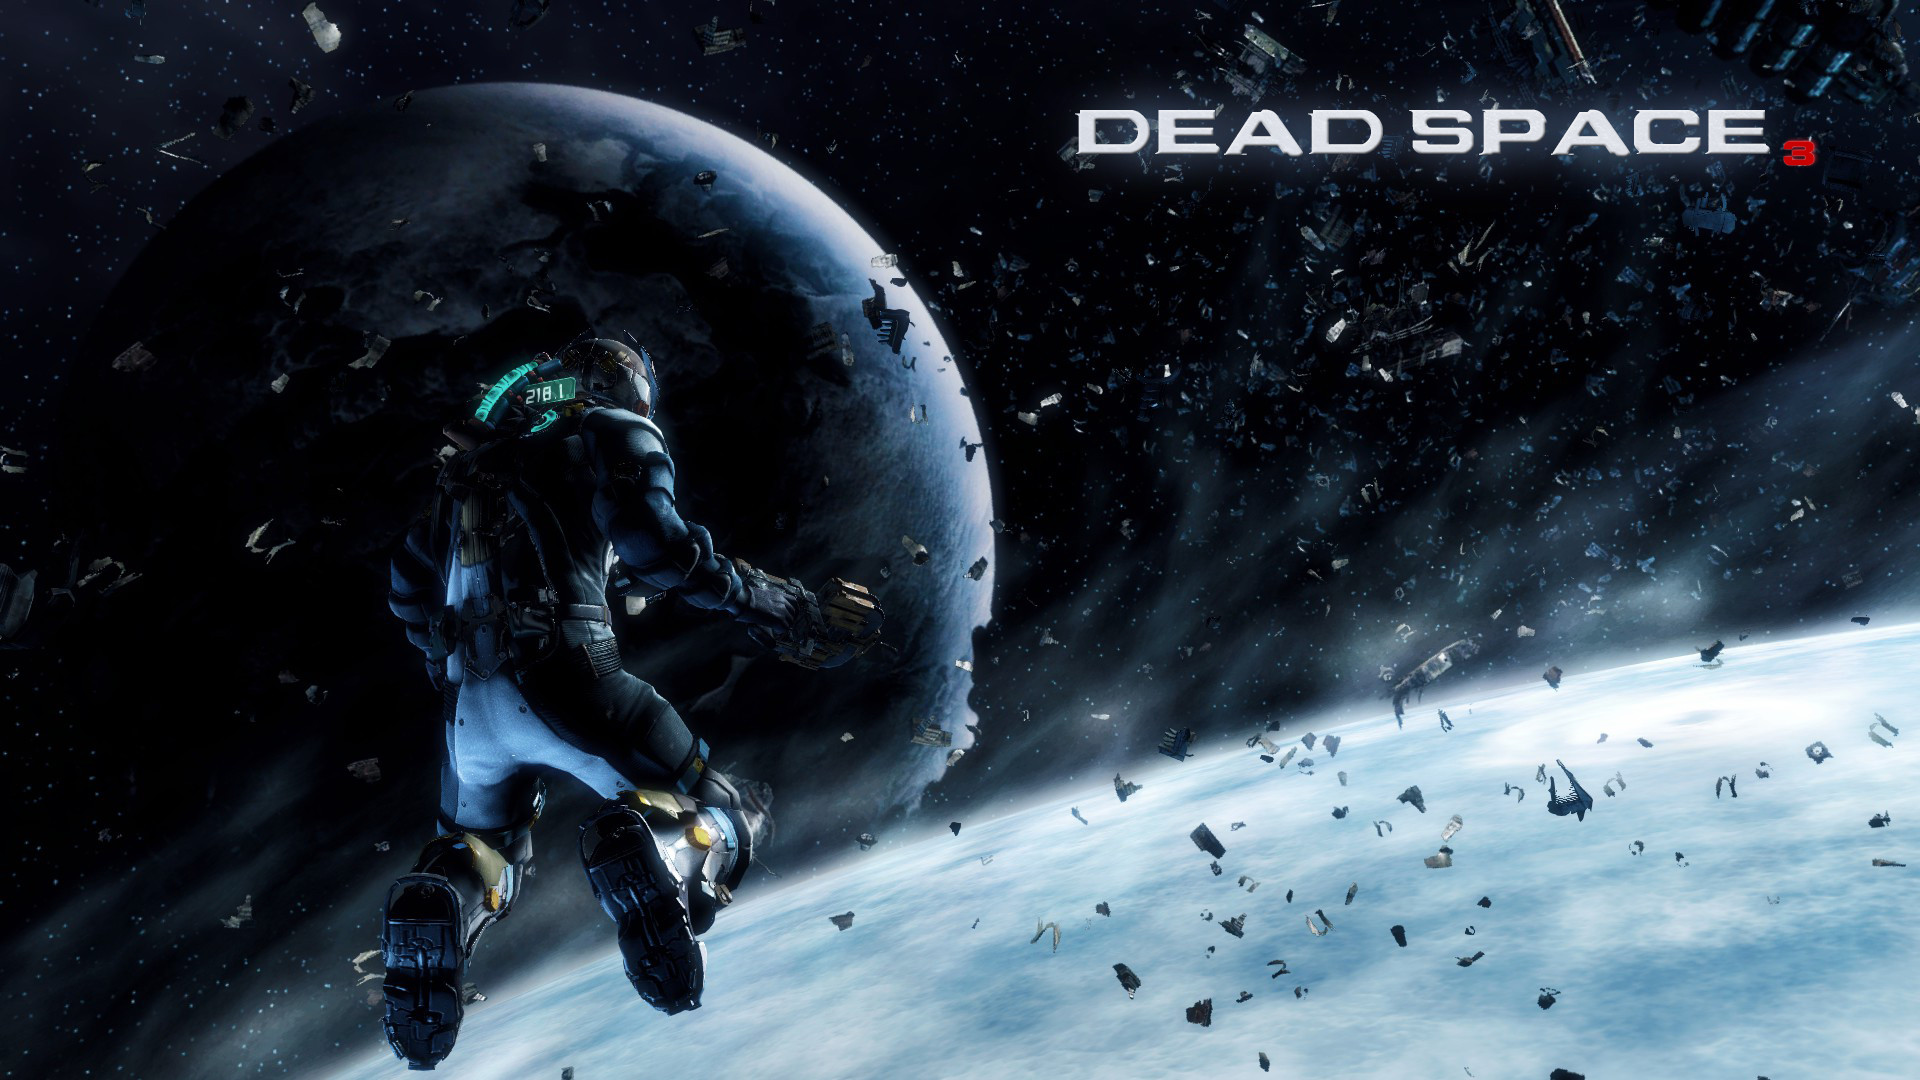 Made A Dead Space Wallpaper